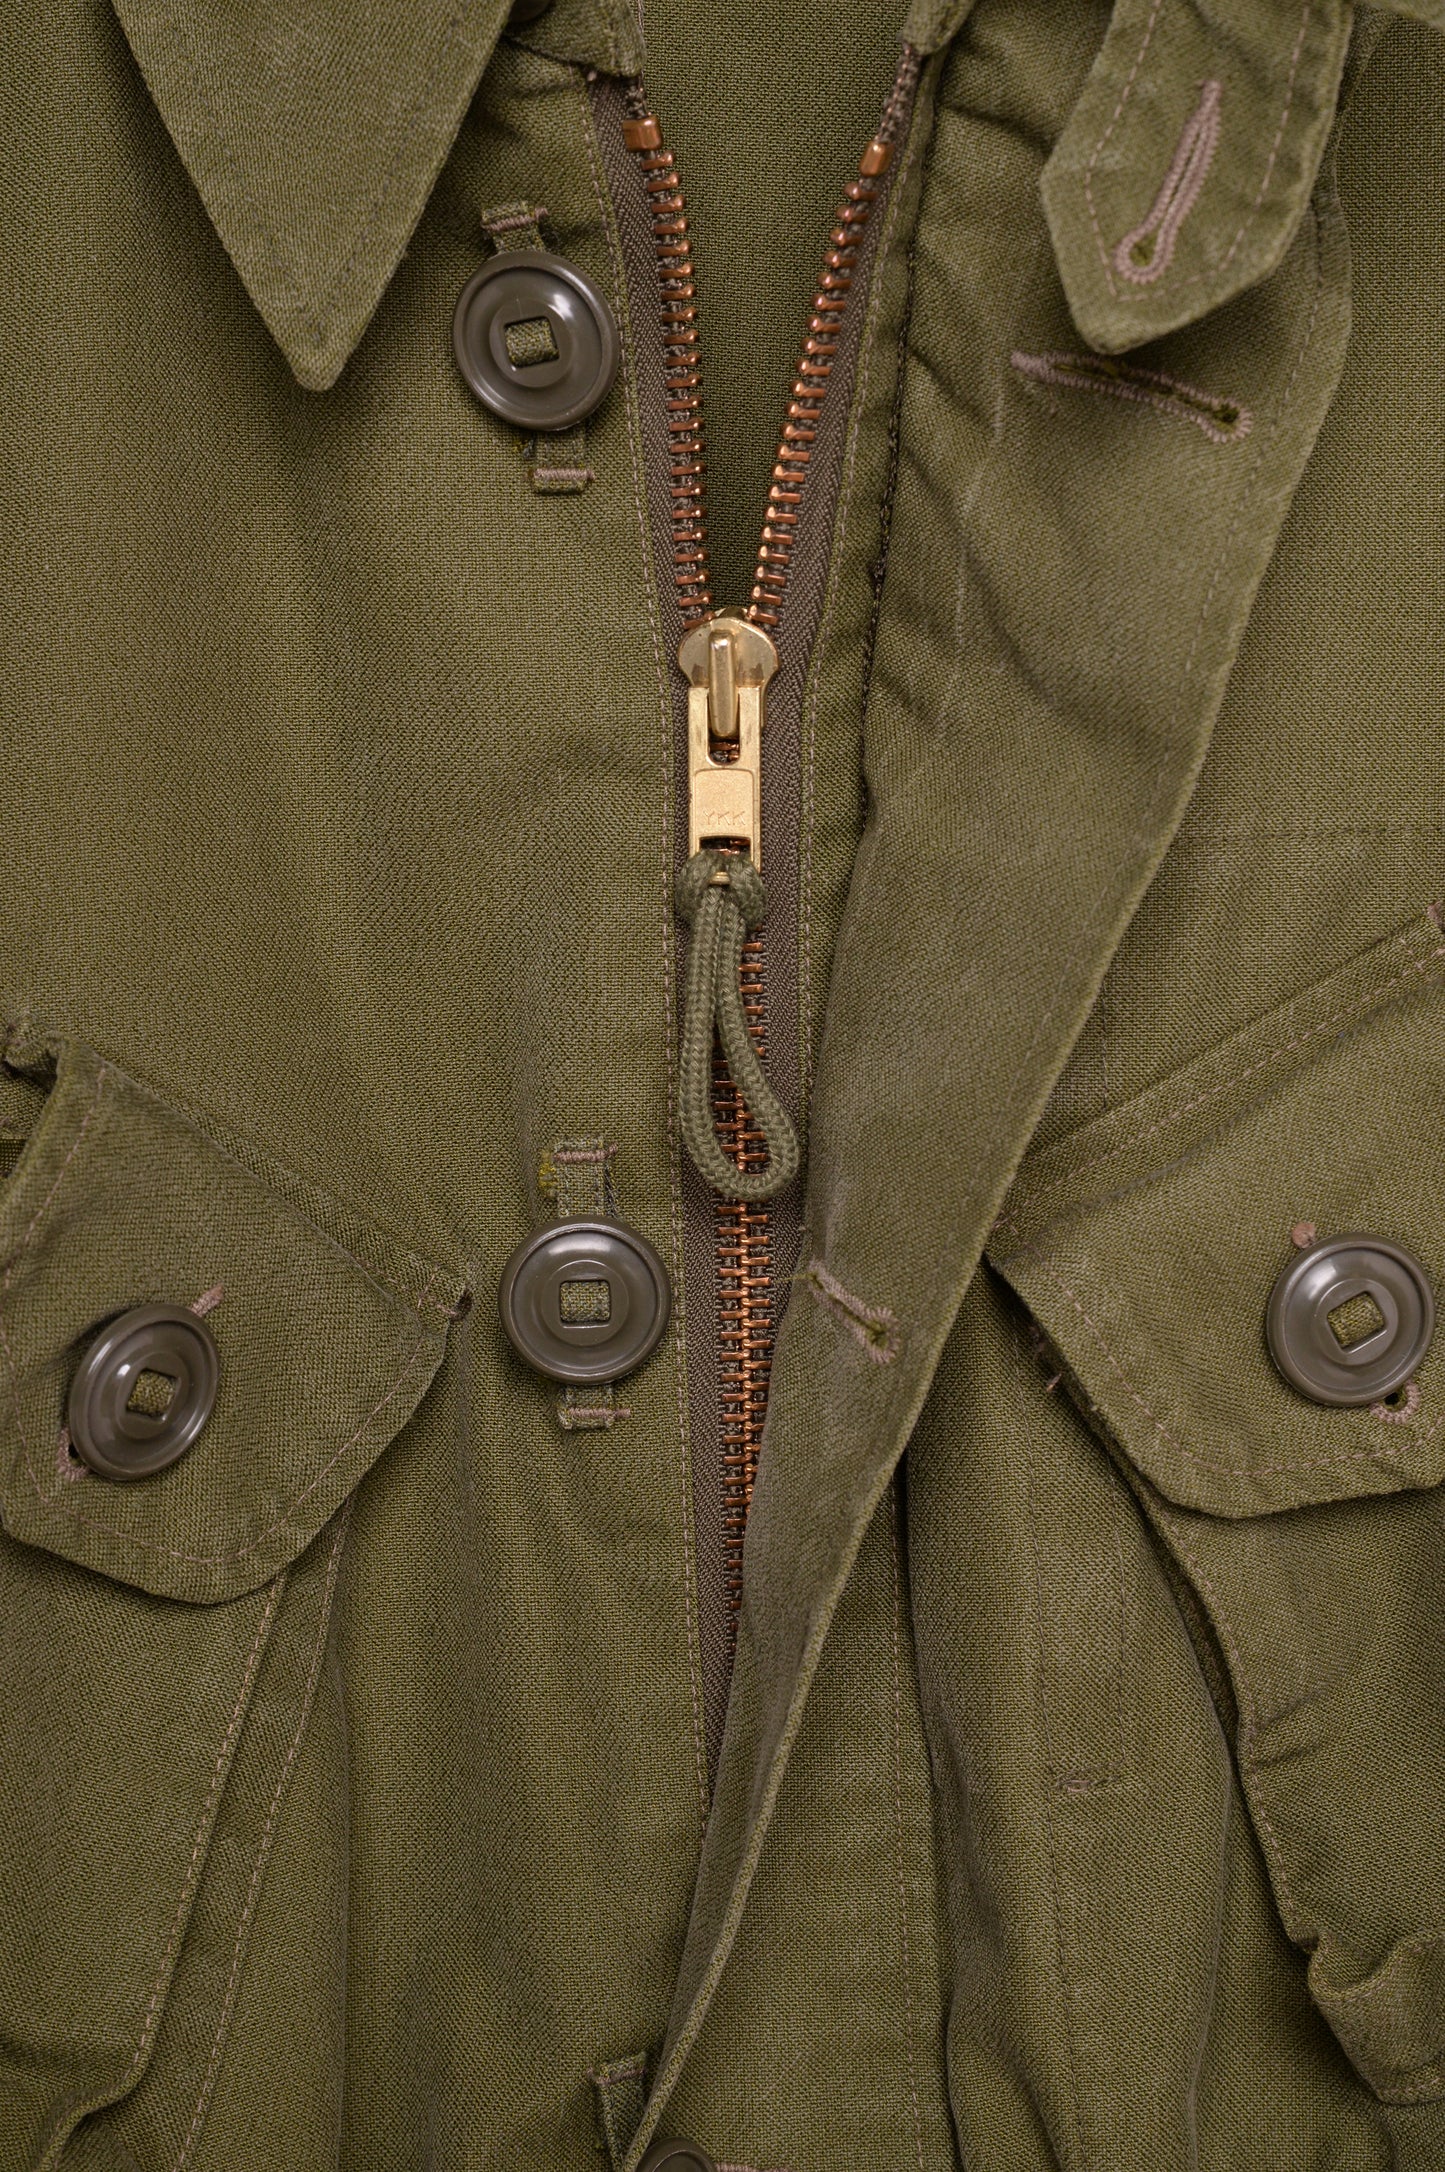 1970s Authentic Military Jacket